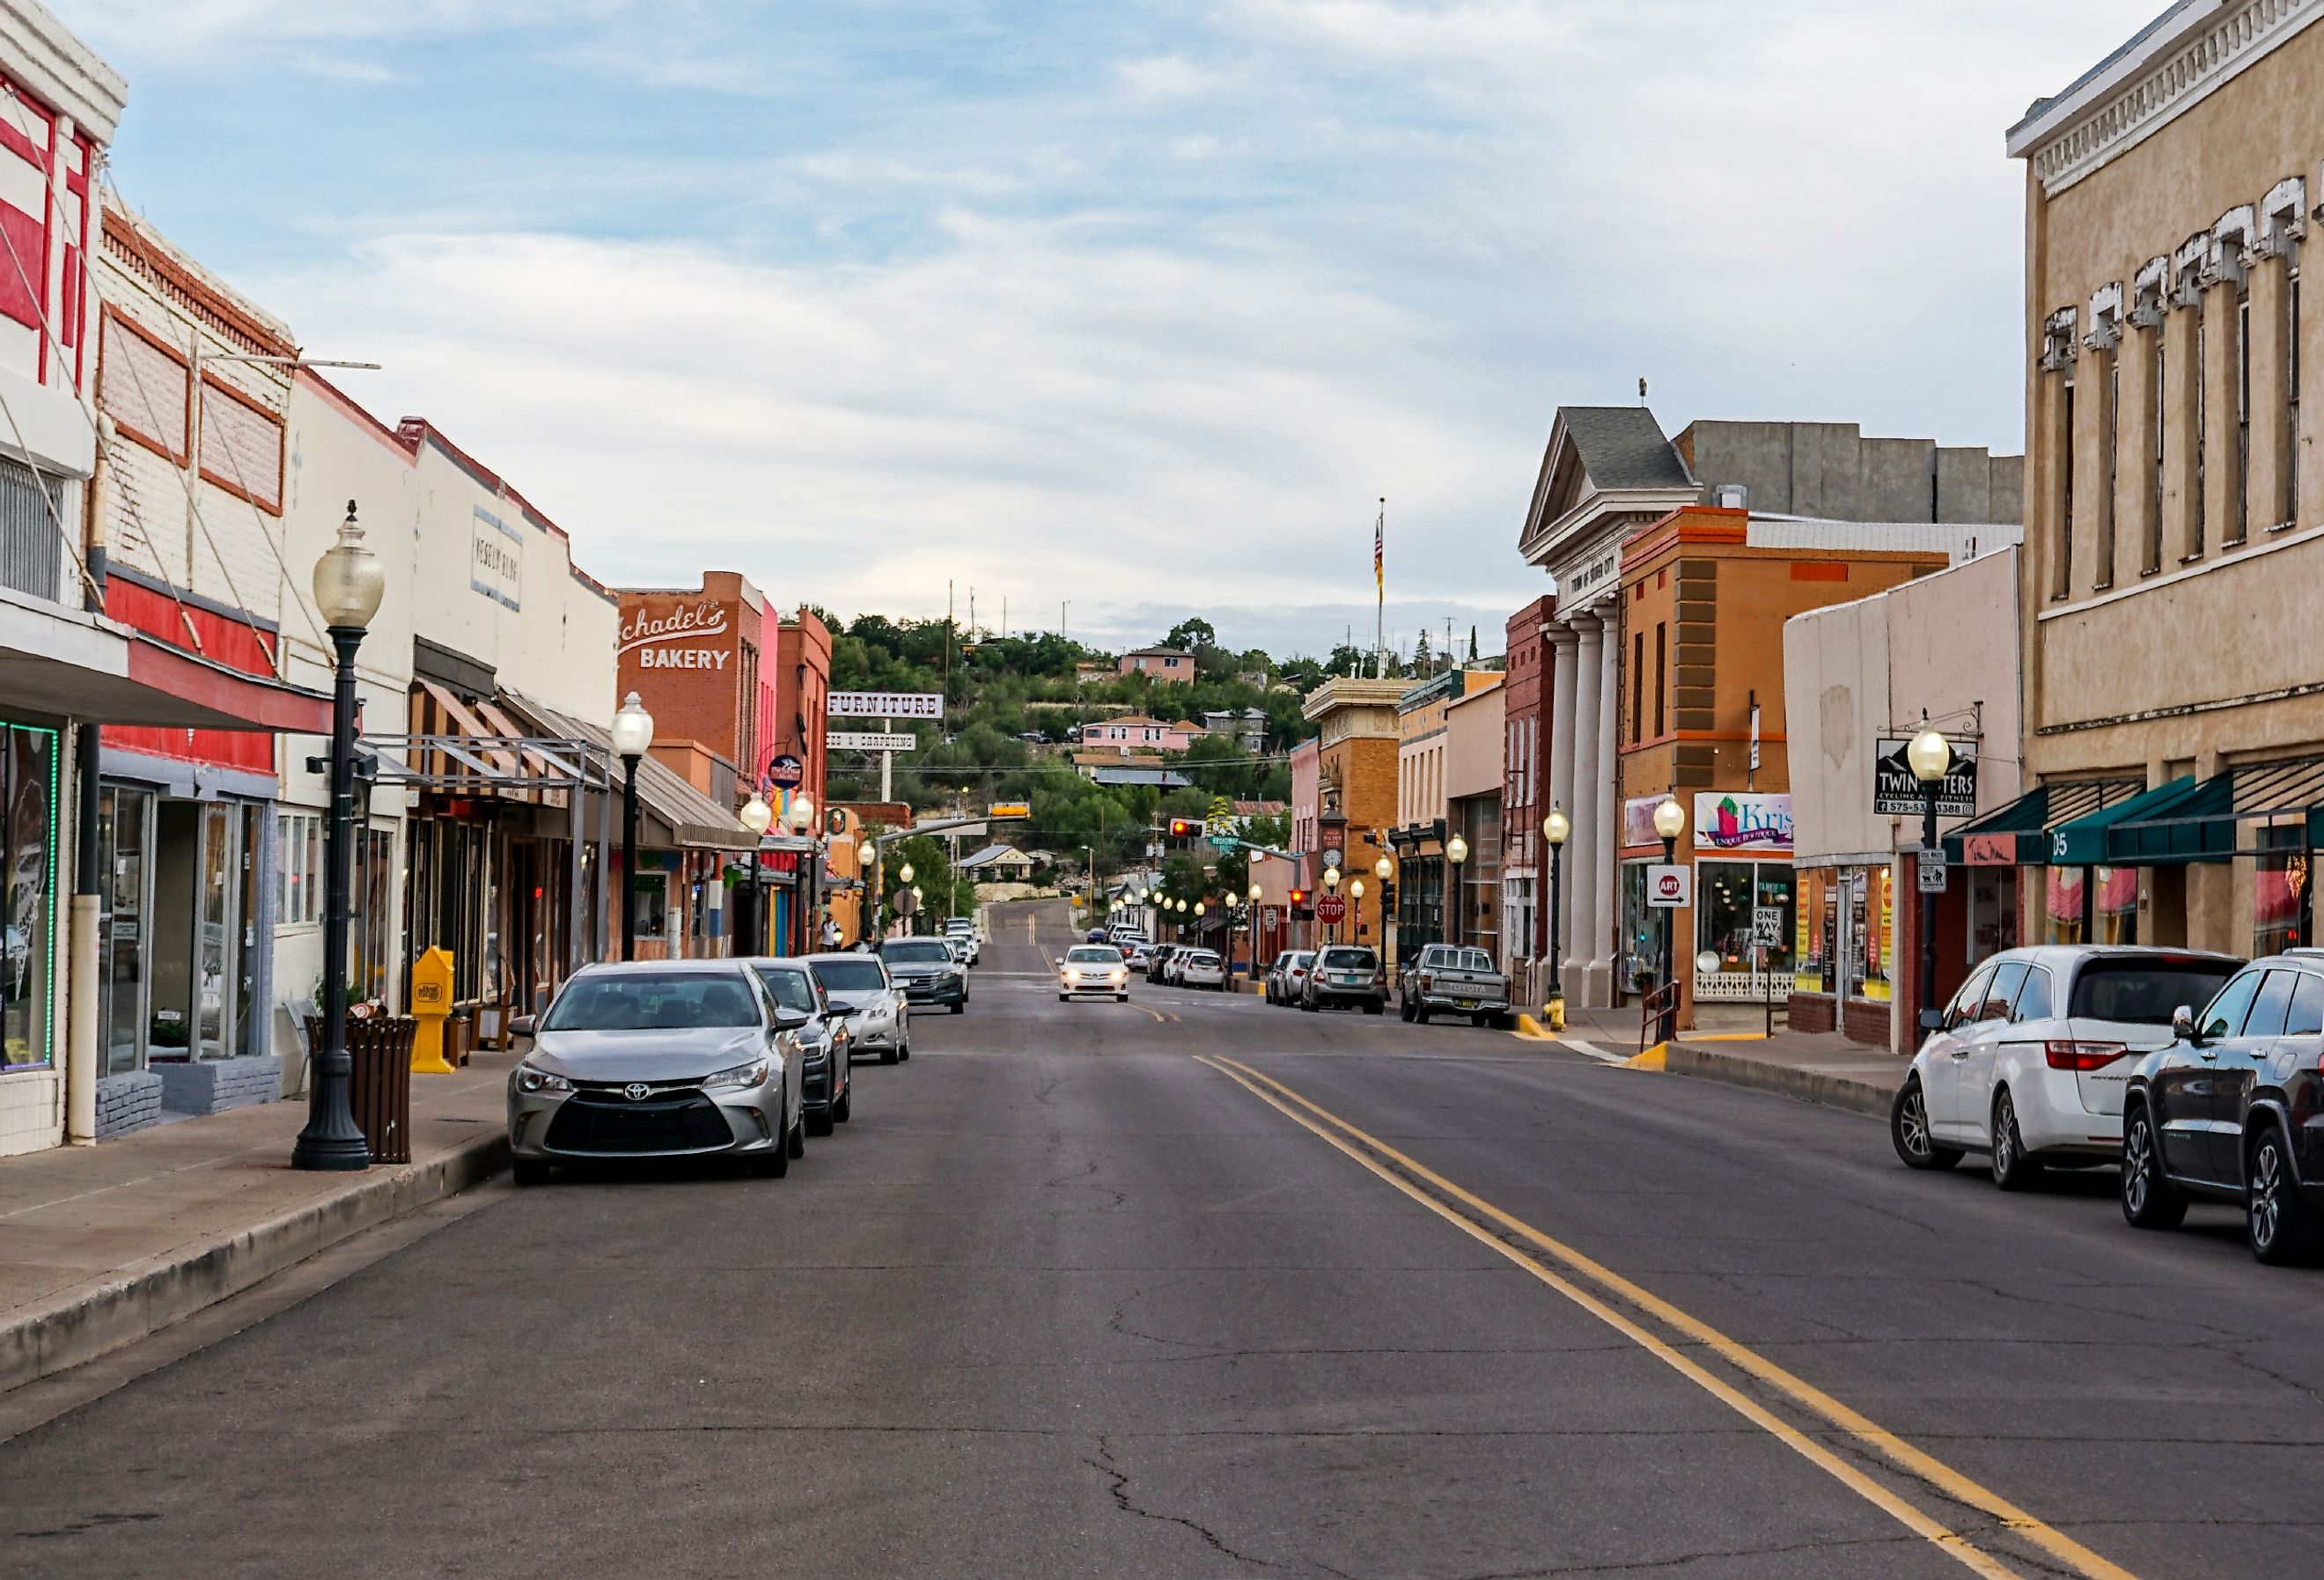 Downtown Silver City, New Mexico. Image credit Underawesternsky via Shutterstock